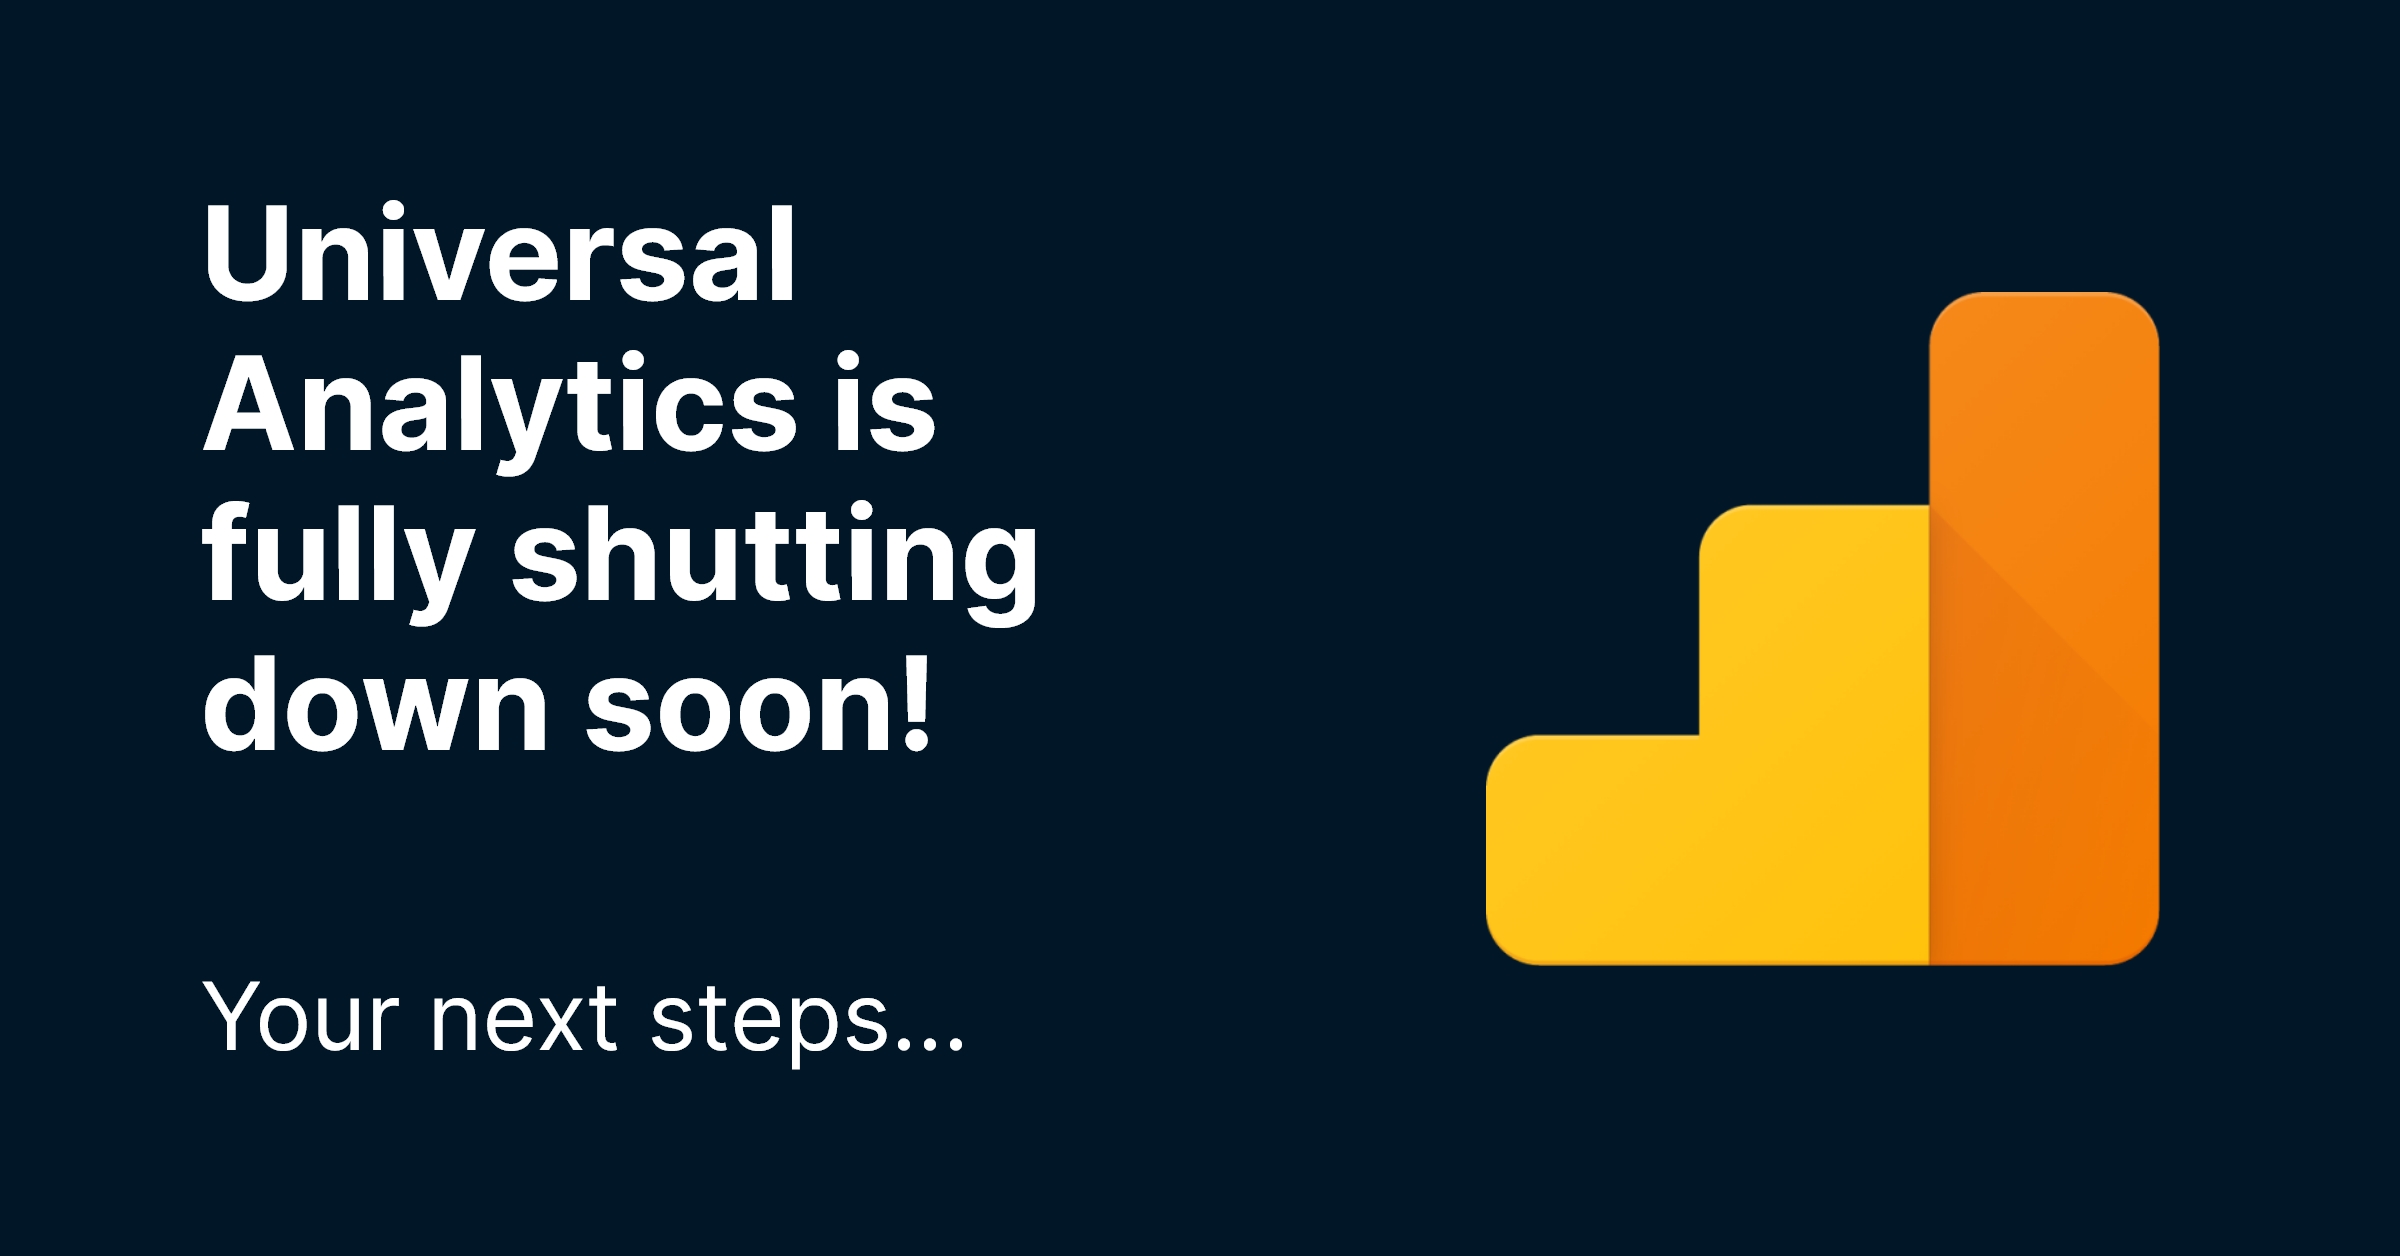 Universal Analytics is fully shutting down soon! Your next steps